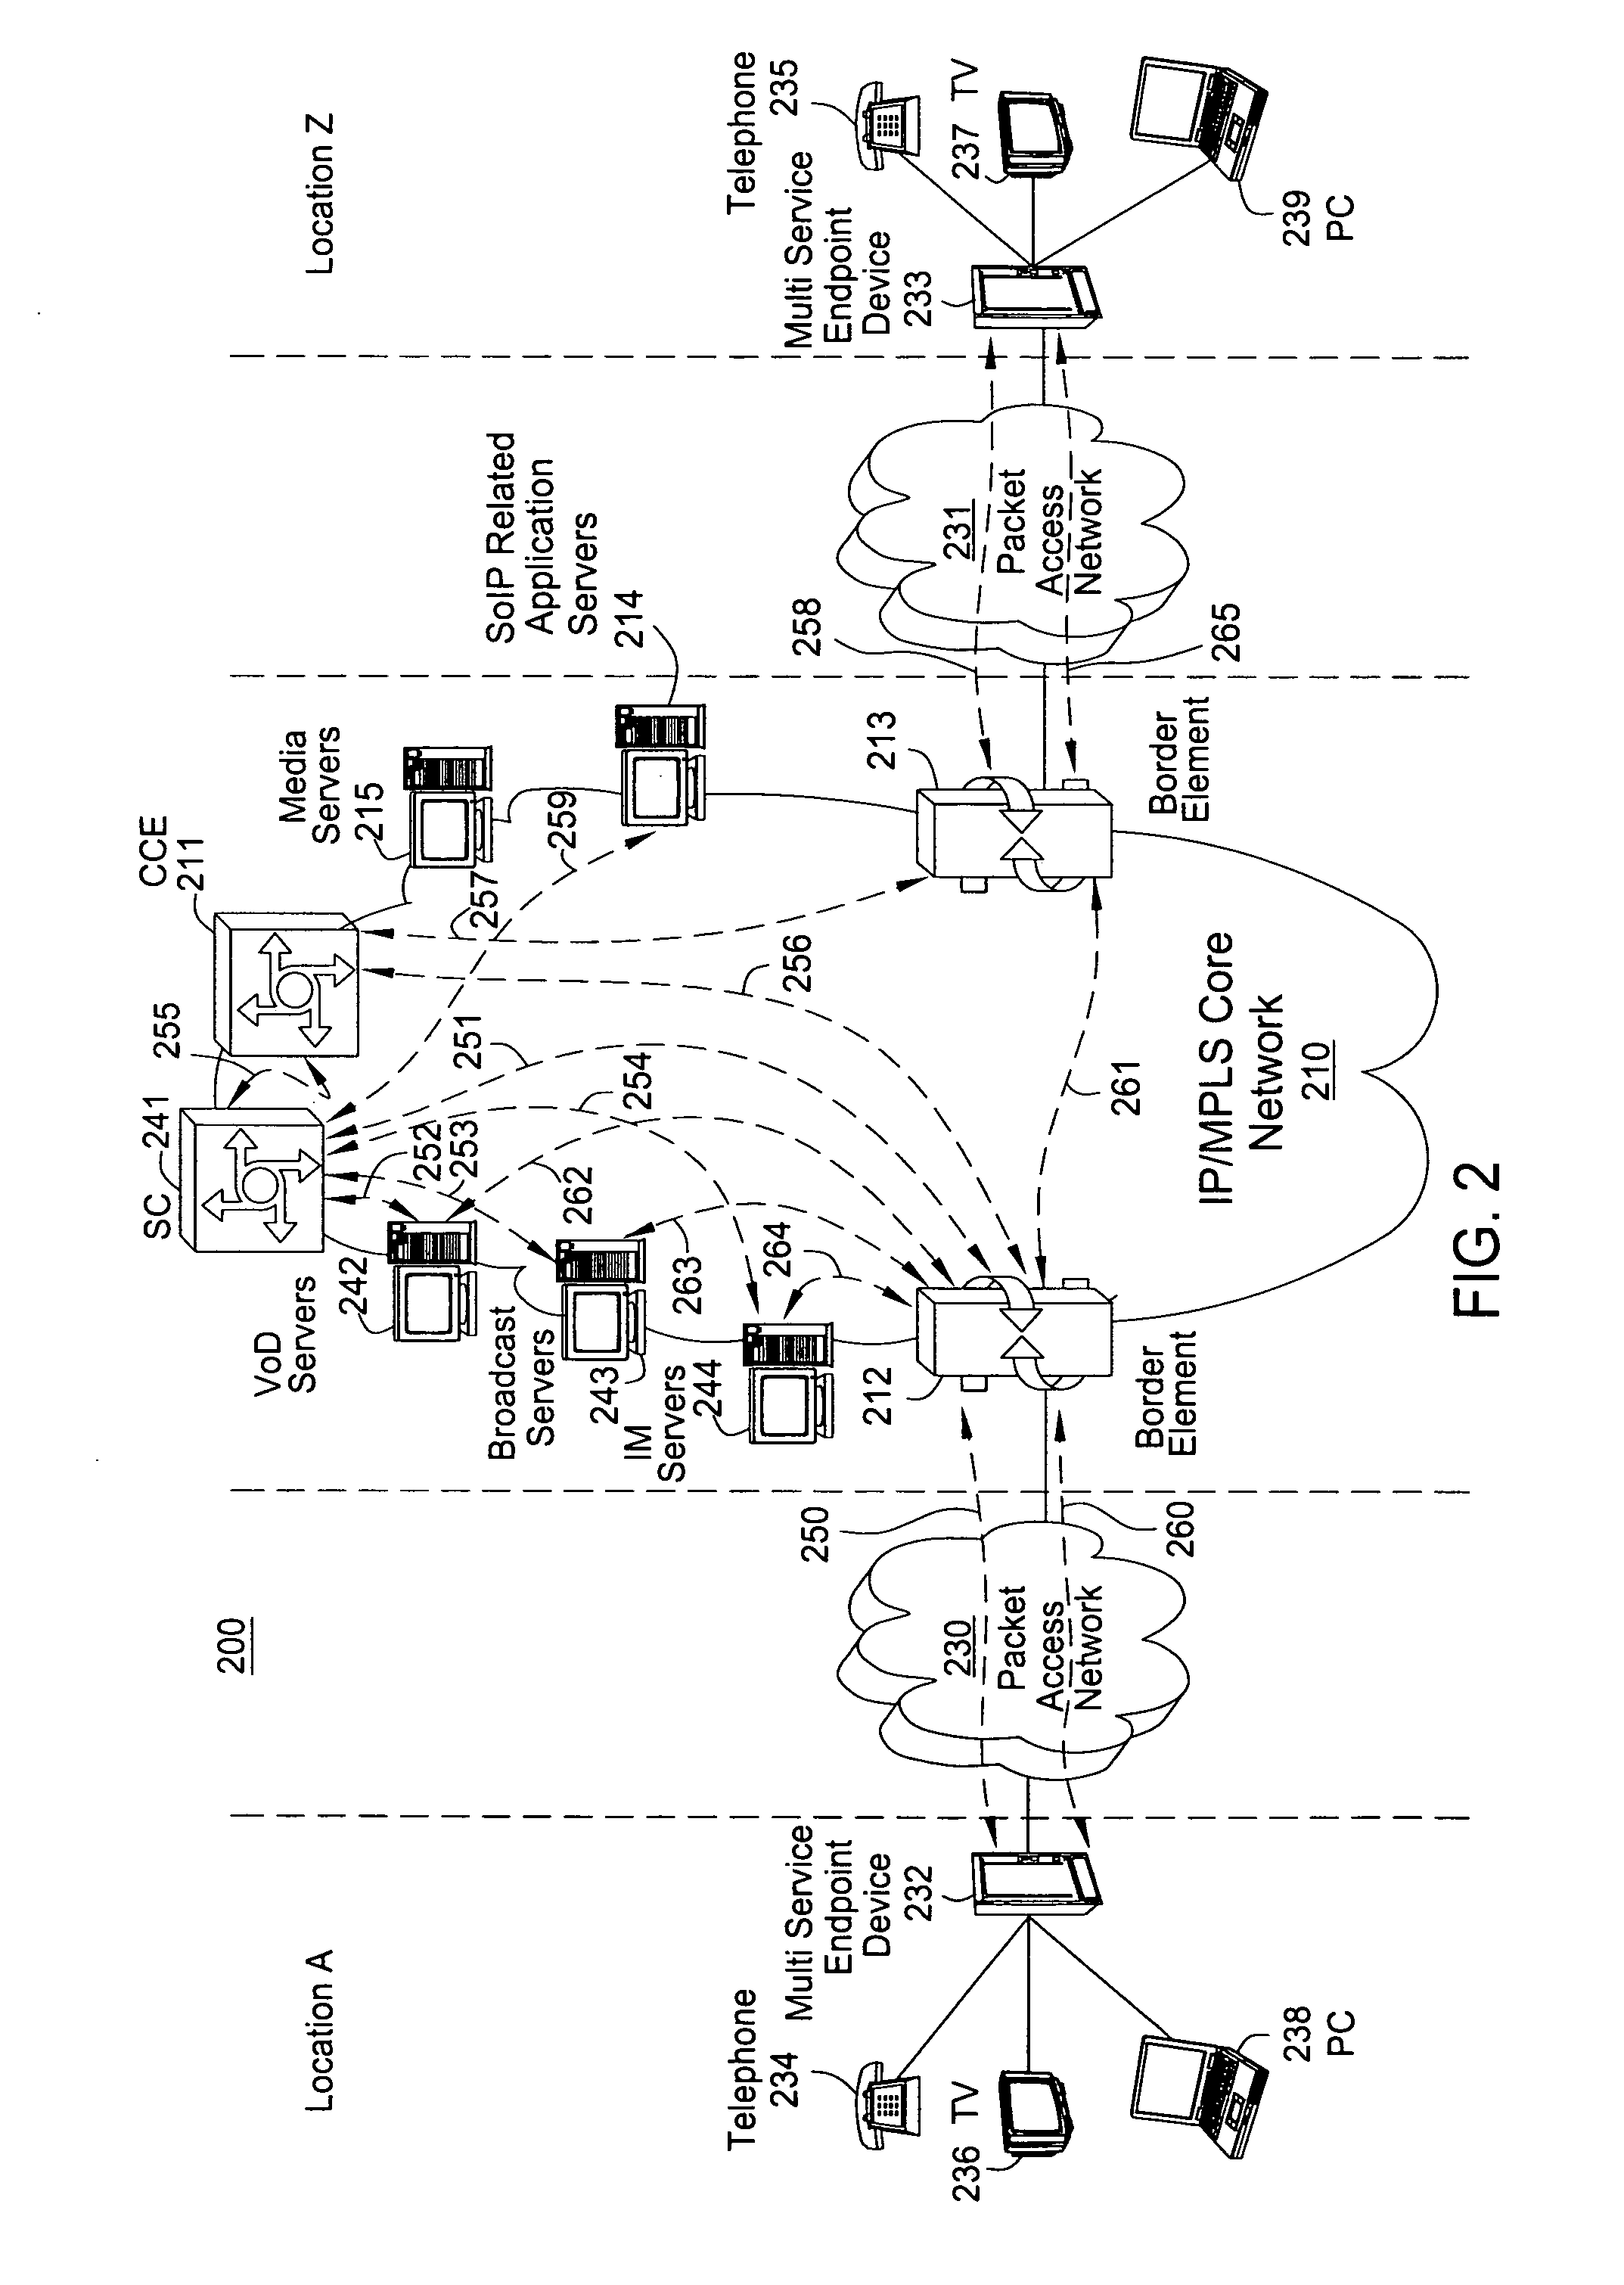 Method and apparatus for providing a personalized television channel